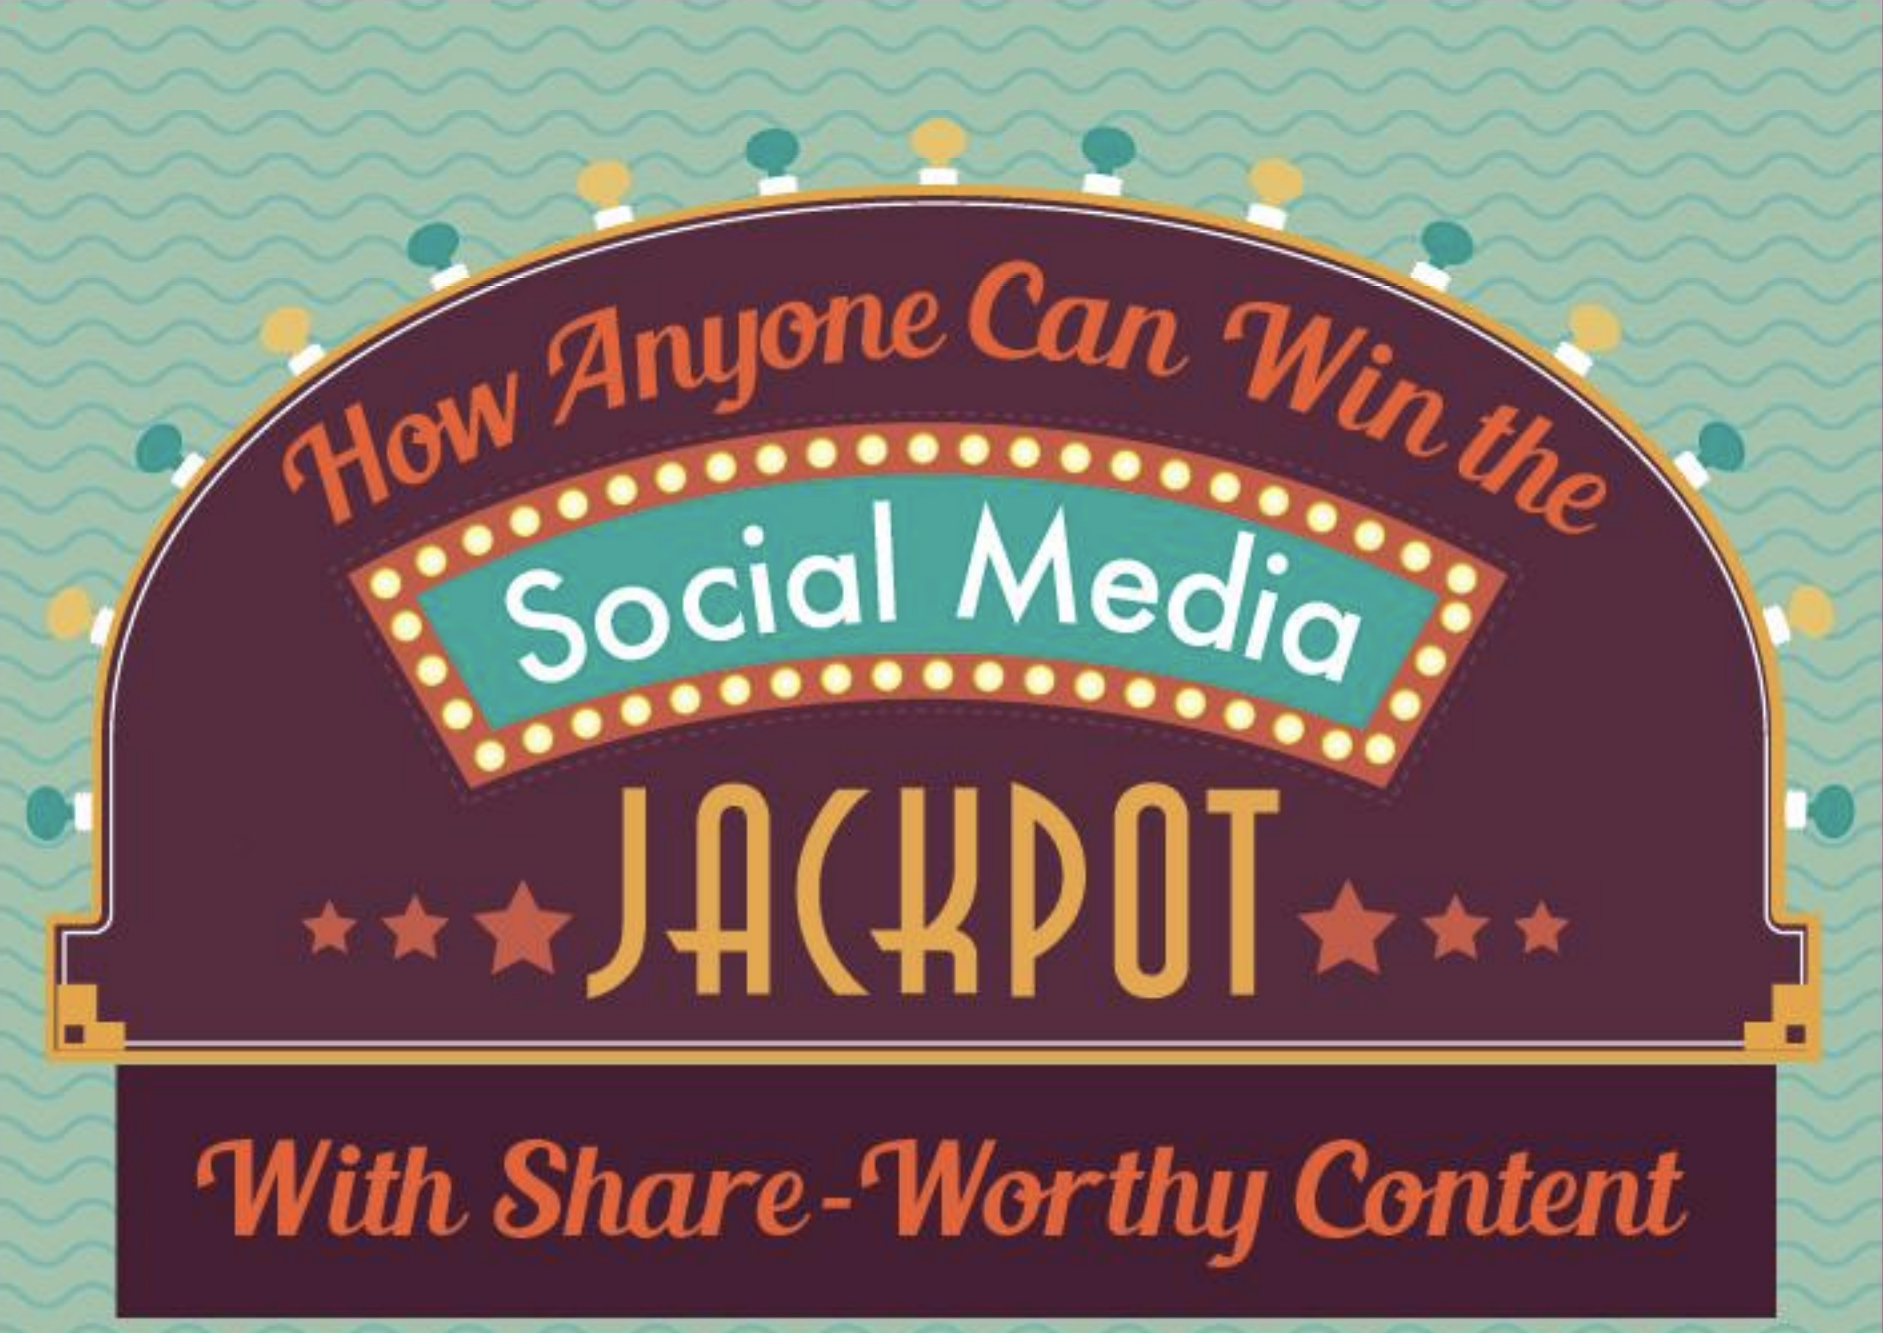 How to win with Social Marketing